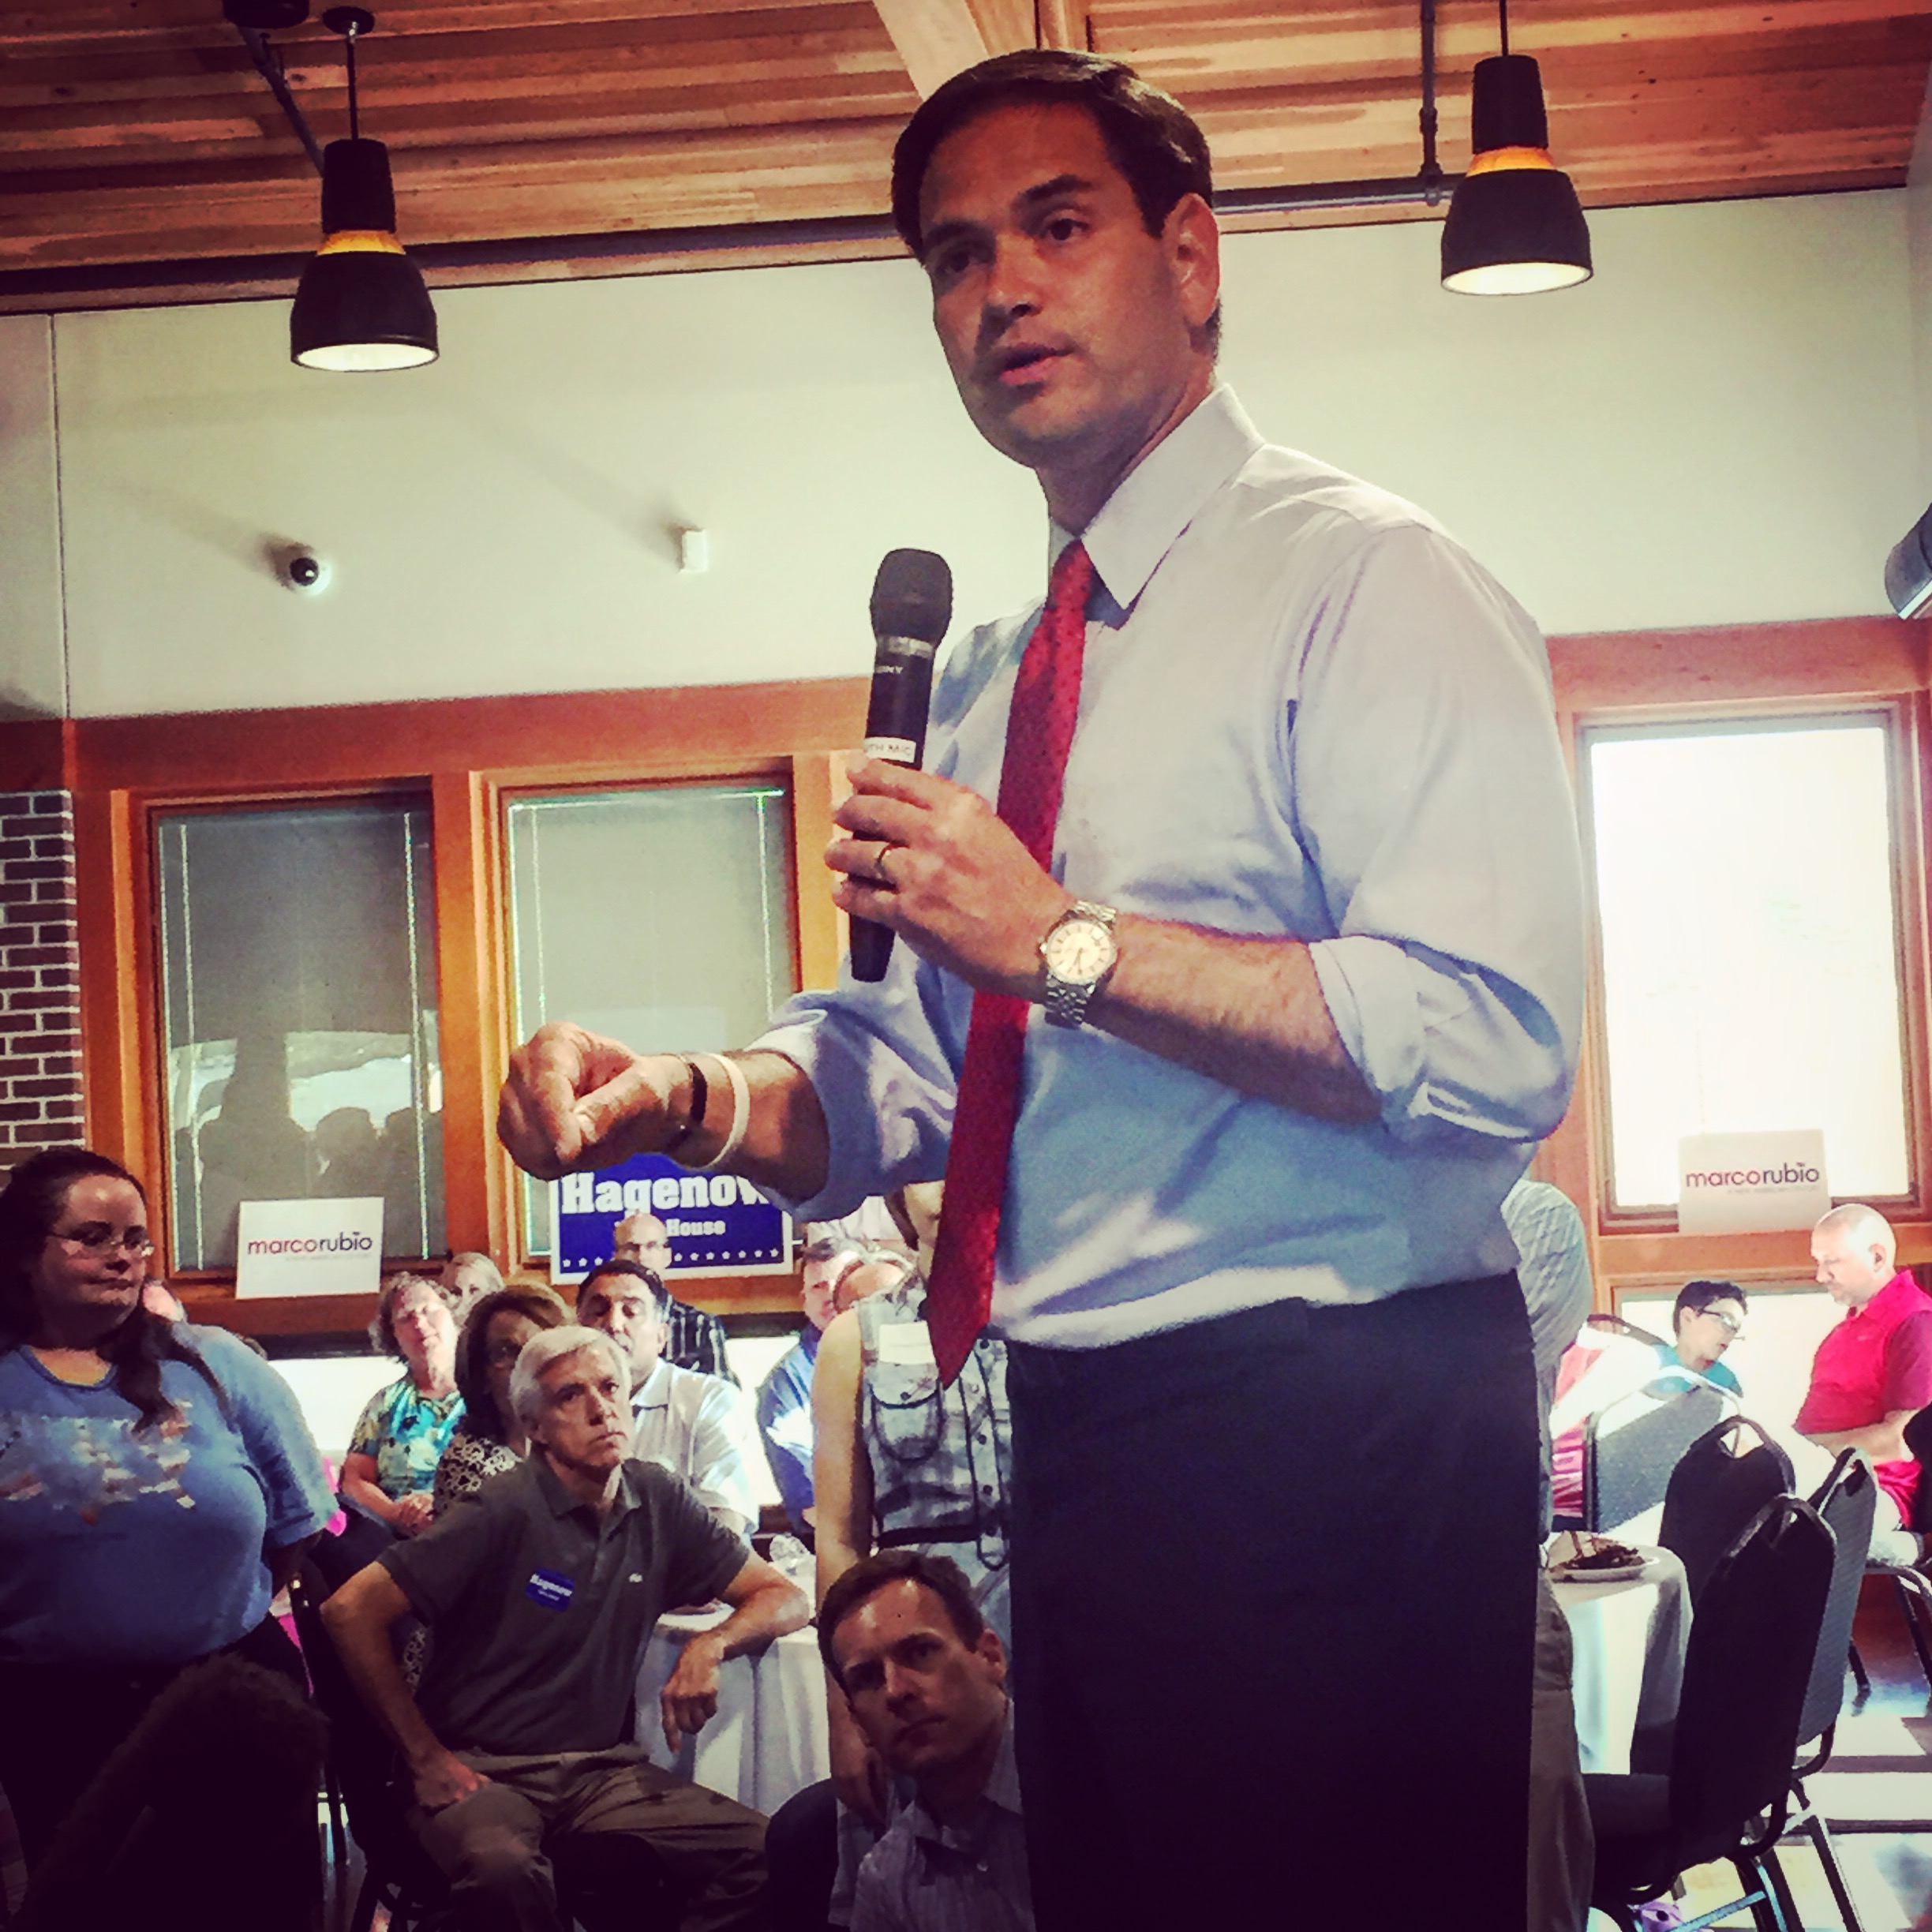 Rubio touches on clean energy, Planned Parenthood in Cedar Falls